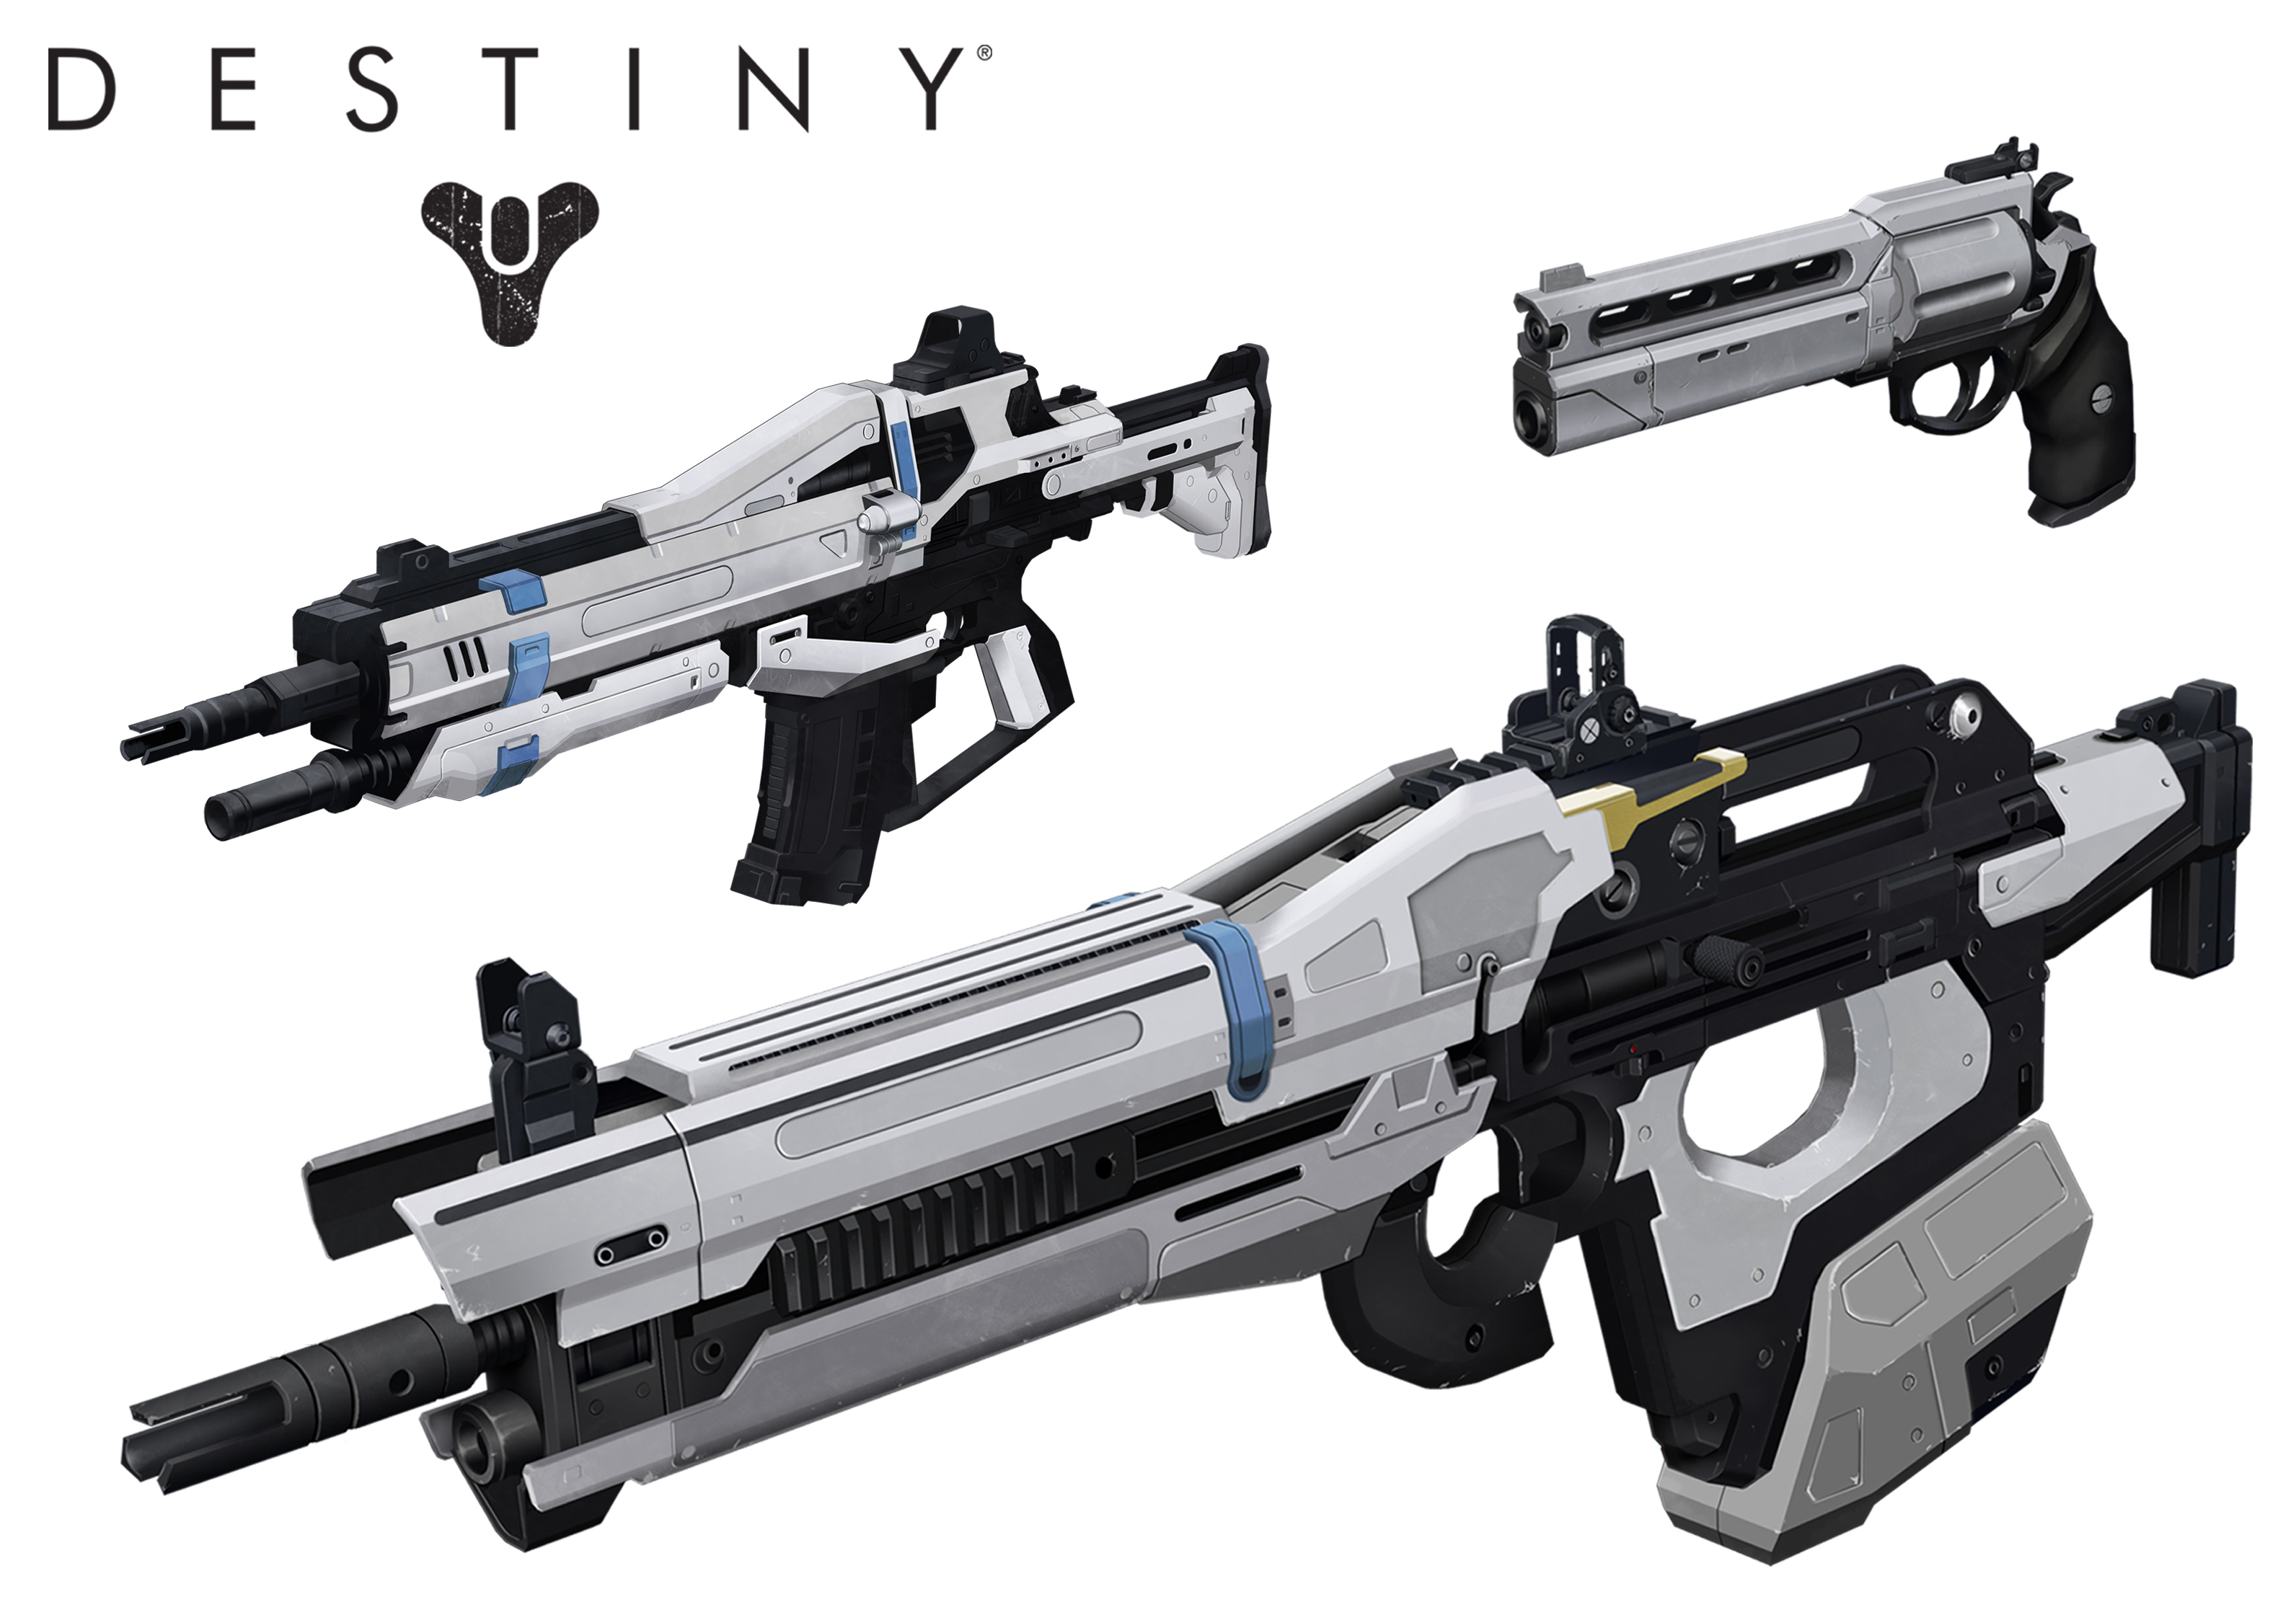 2014 "Destiny" weapons, AD Mike Vaillancourt